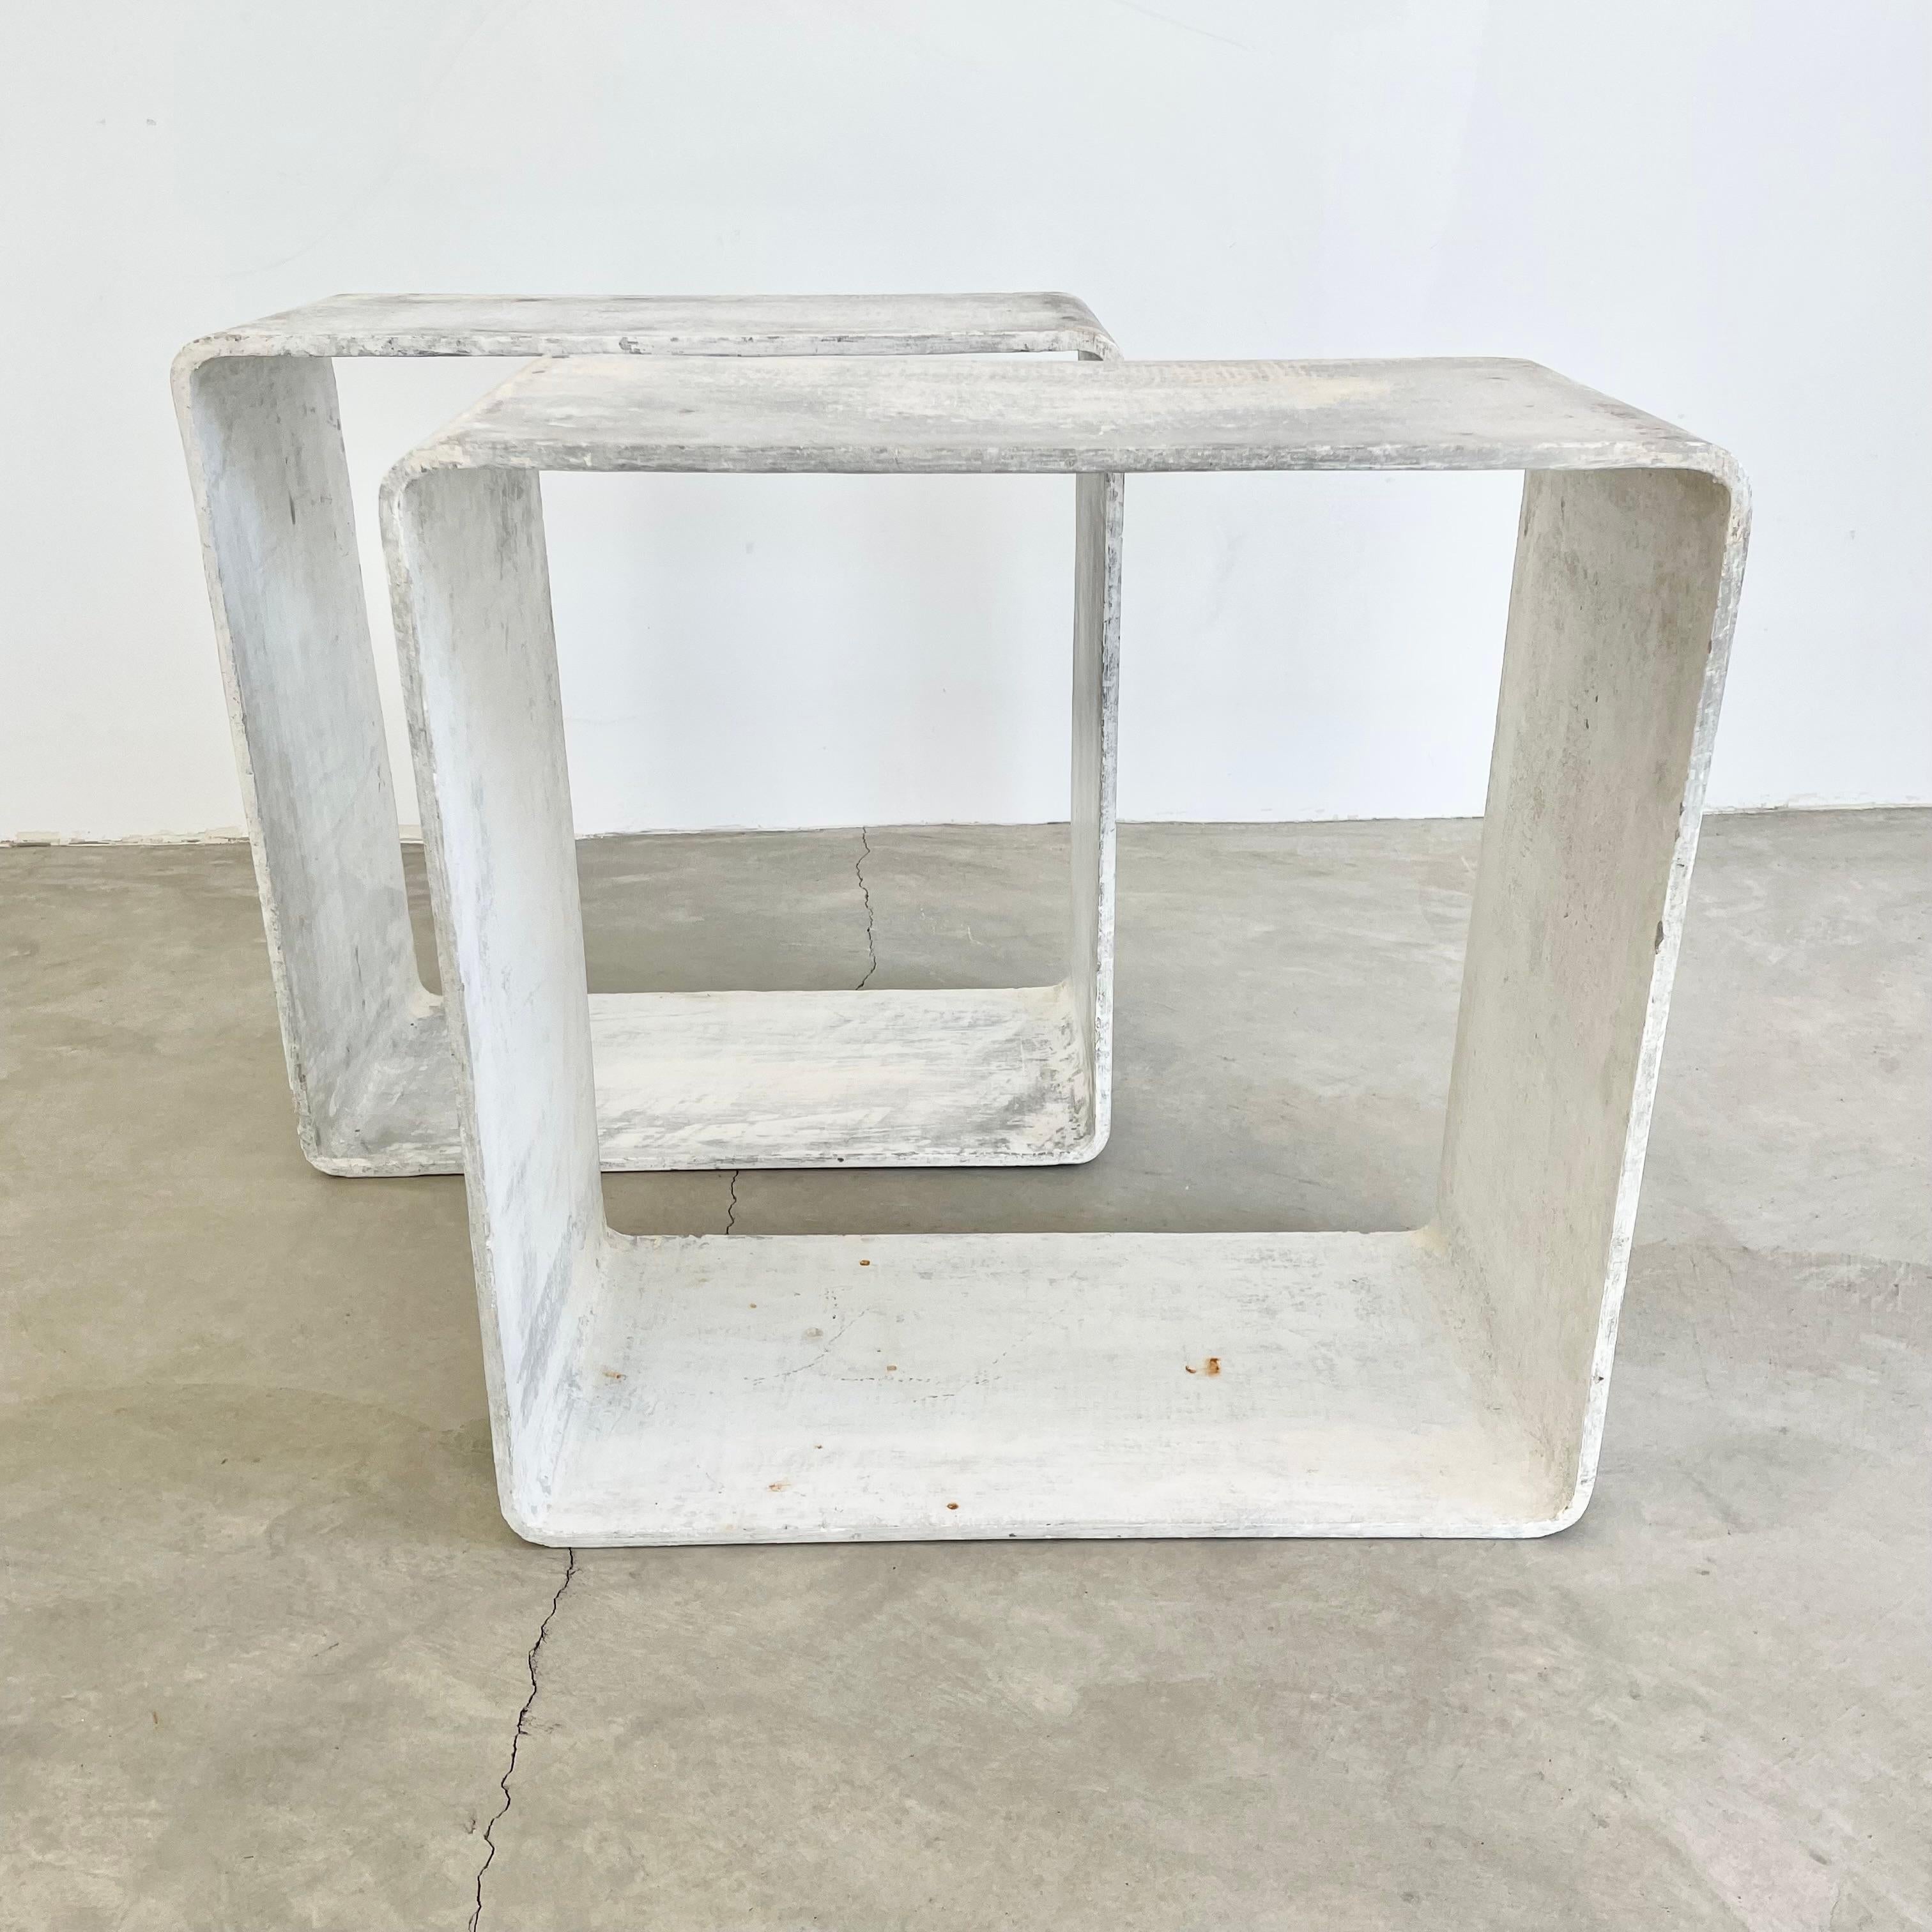 Willy Guhl Concrete Cube Side Table, 1960s Switzerland For Sale 3